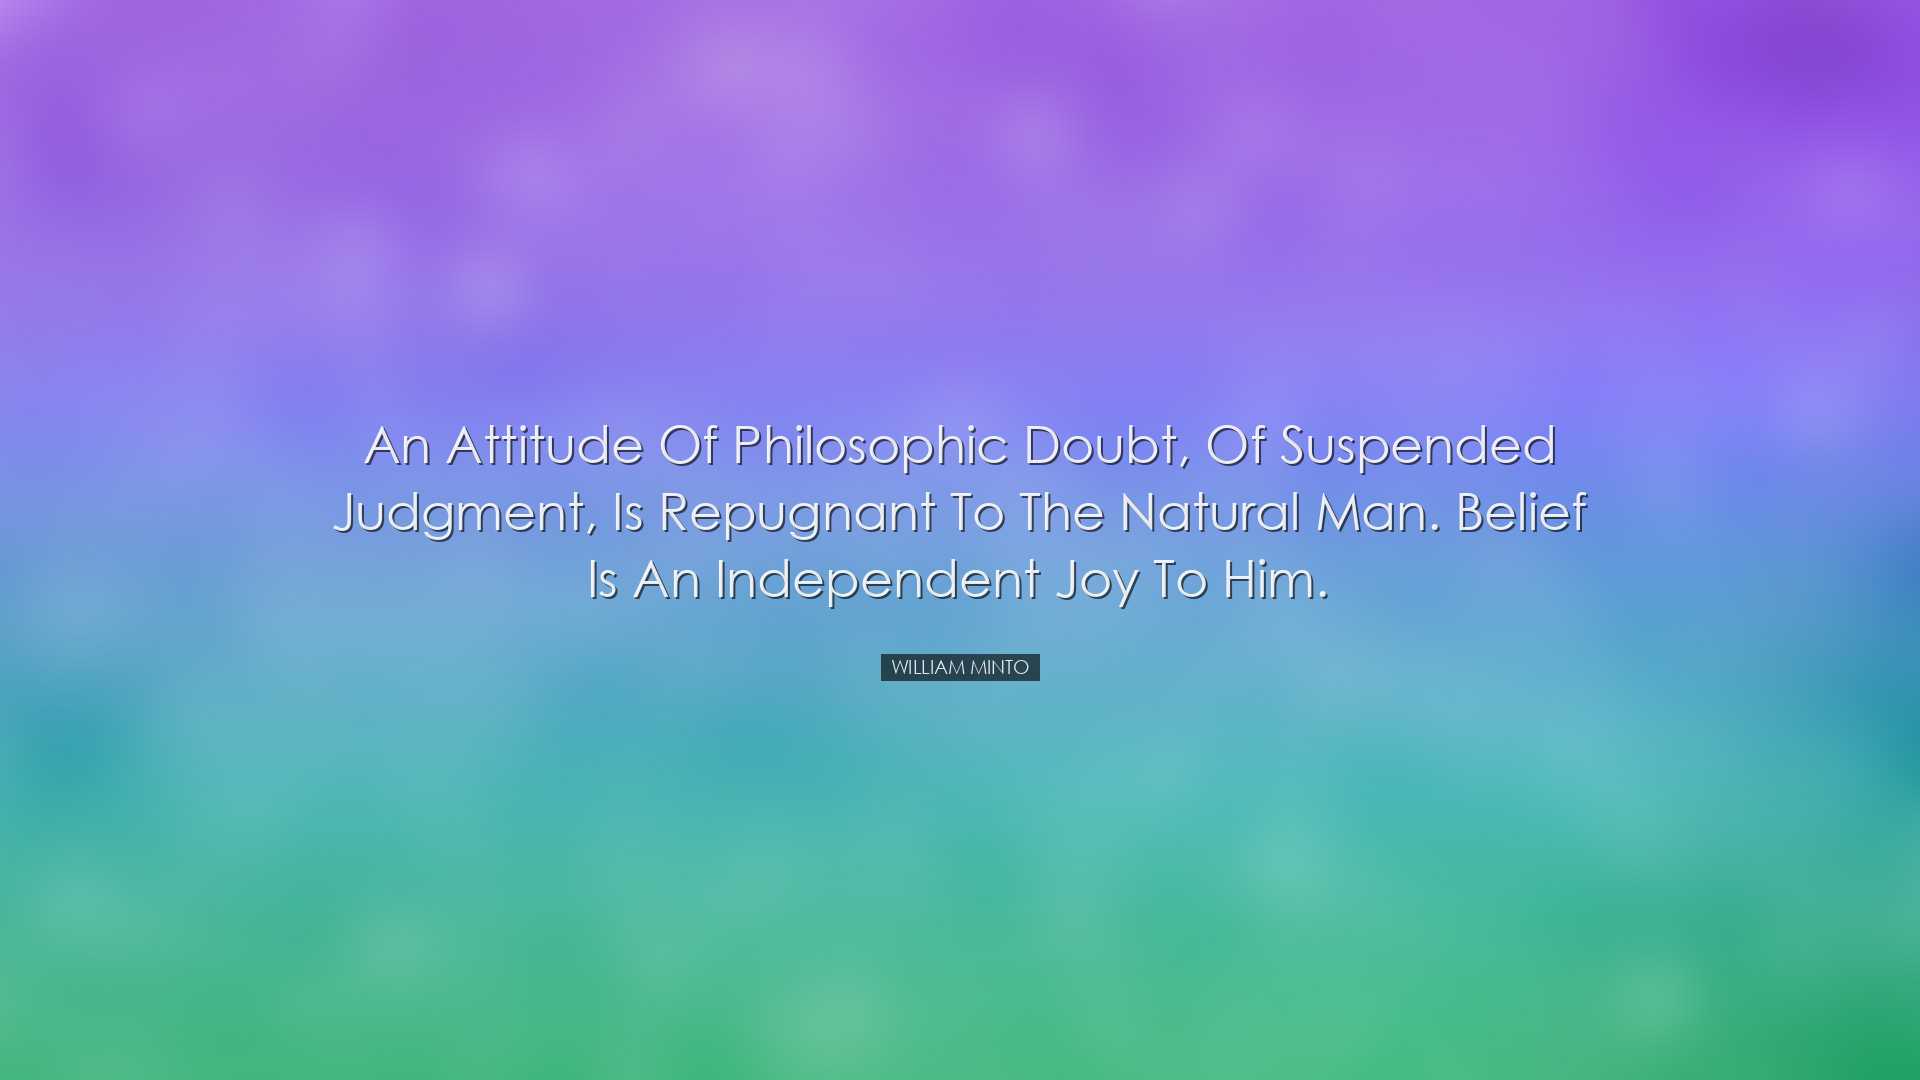 An attitude of philosophic doubt, of suspended judgment, is repugn